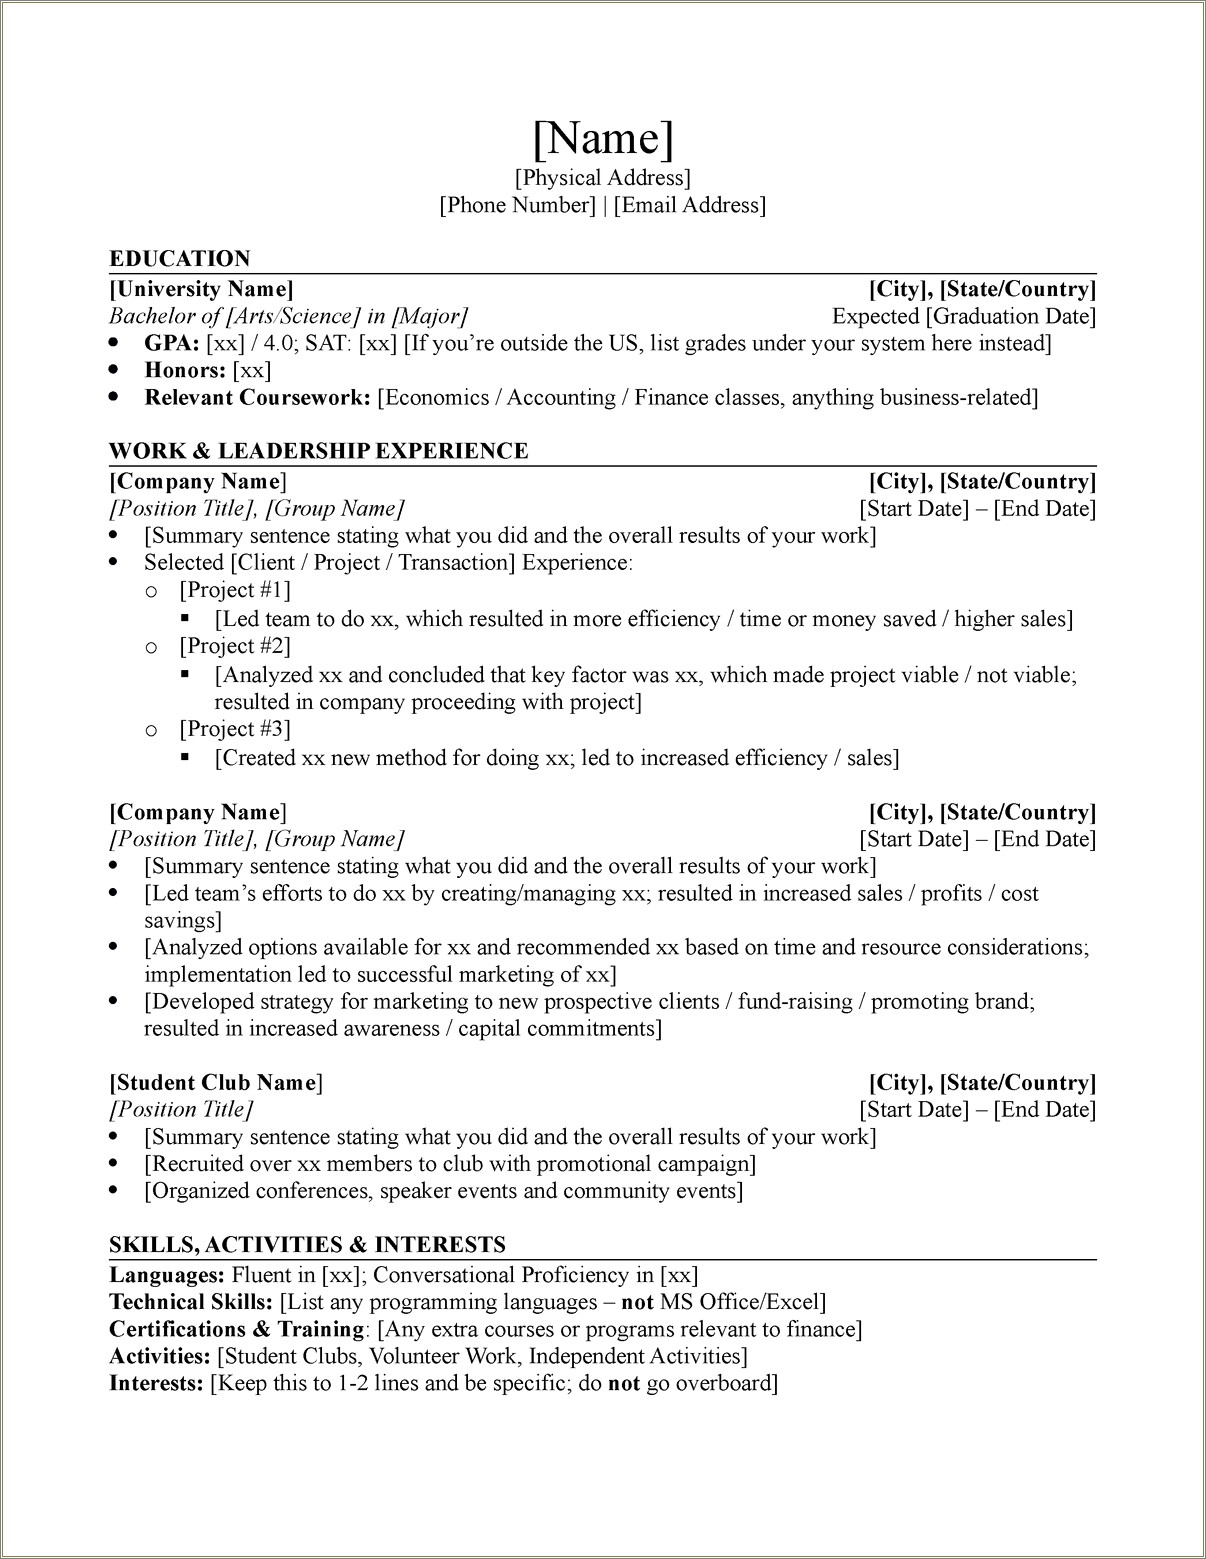 Investment Banking Resume Wiht Without Experience